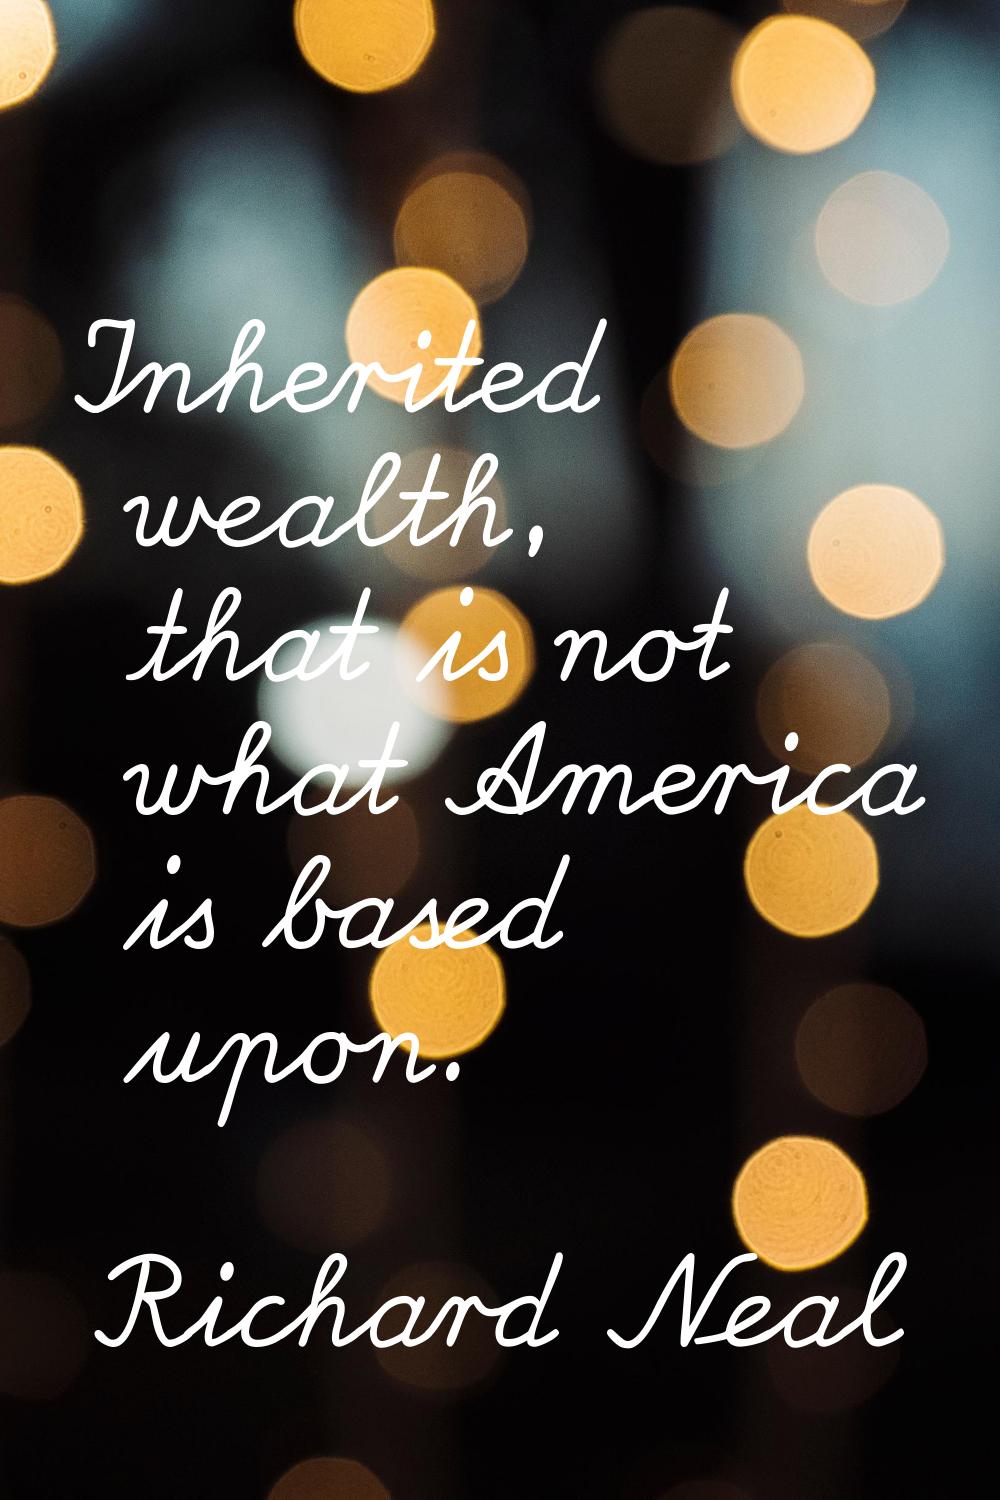 Inherited wealth, that is not what America is based upon.